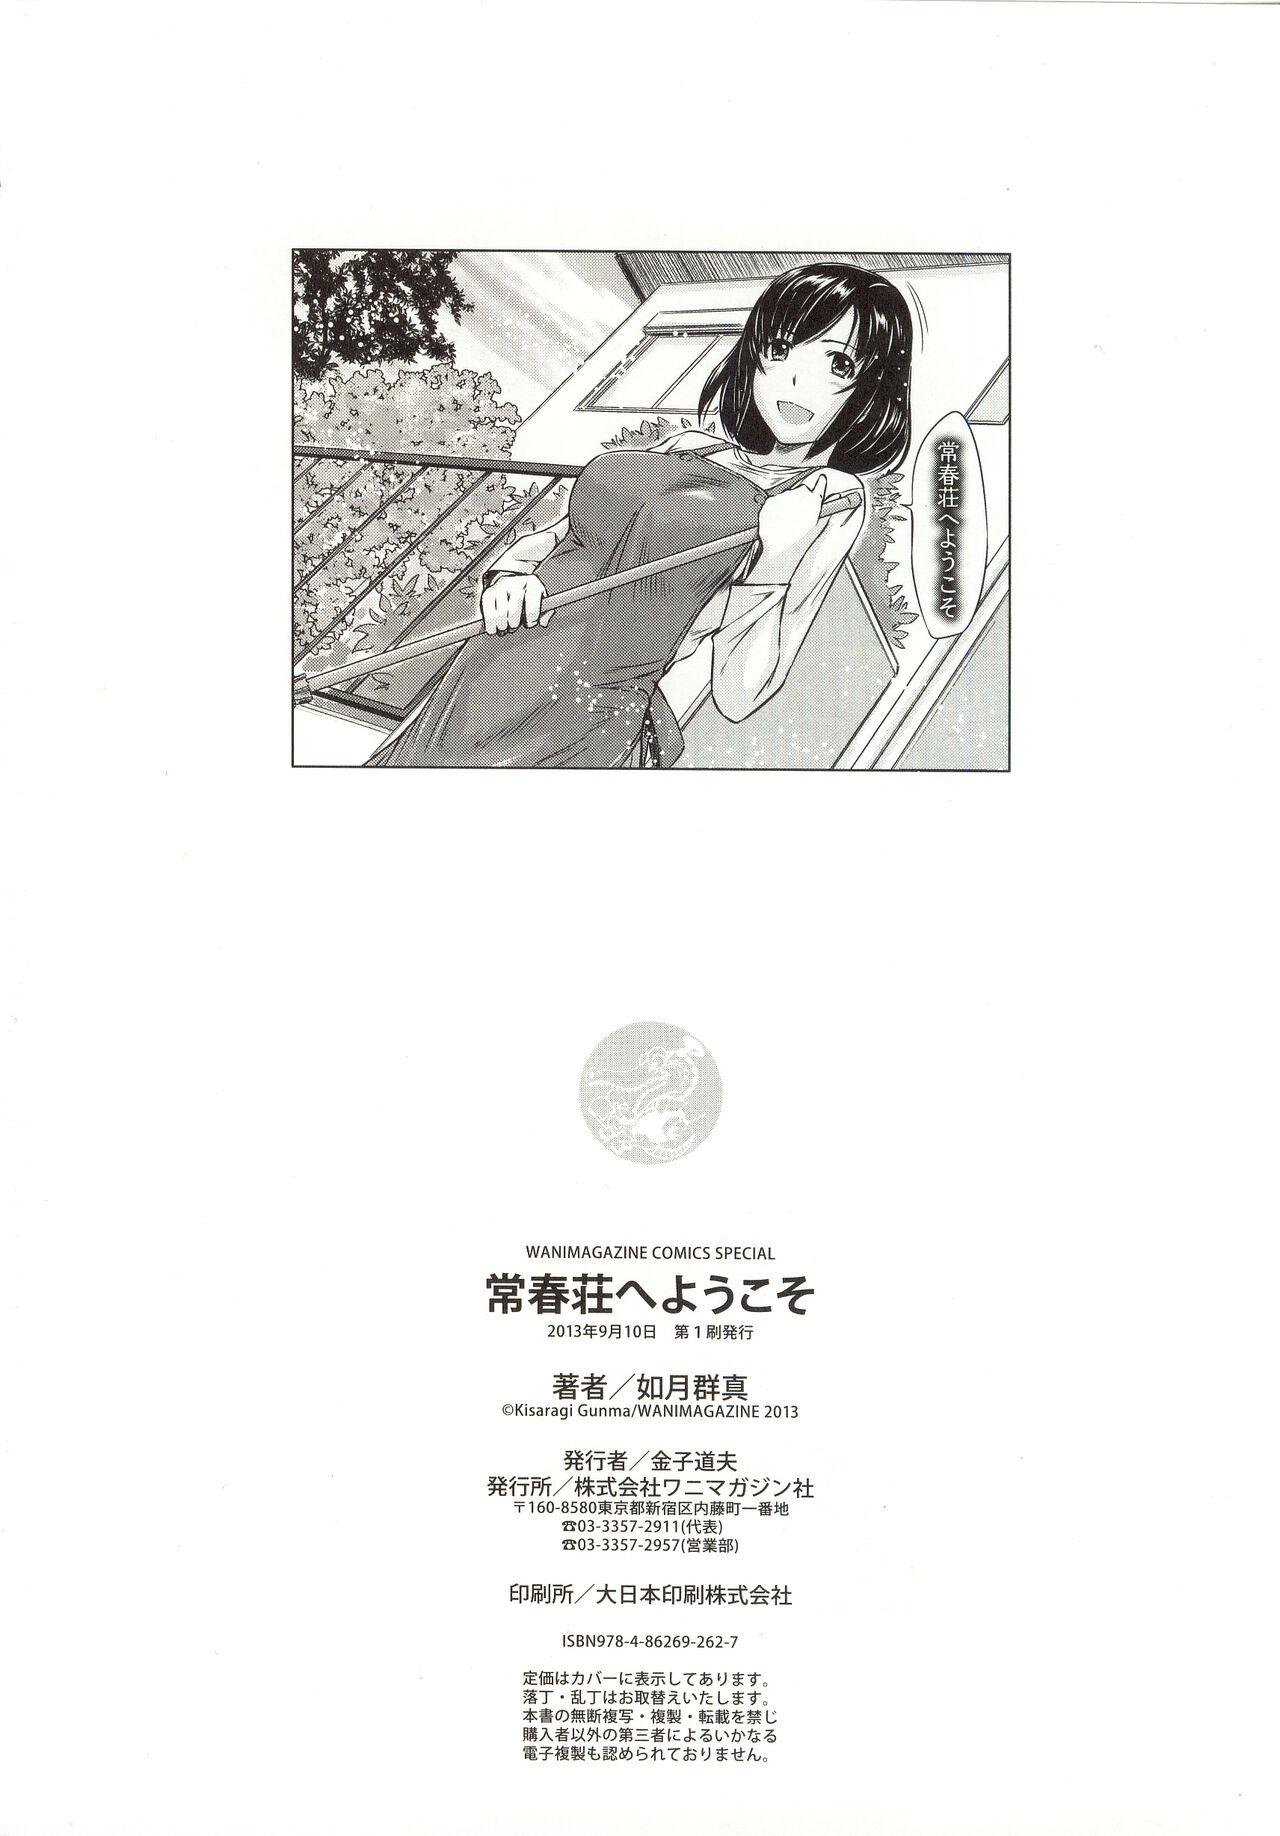 Tokoharusou e Youkoso - Welcome to the apartment of everlasting spring... come to me. 236